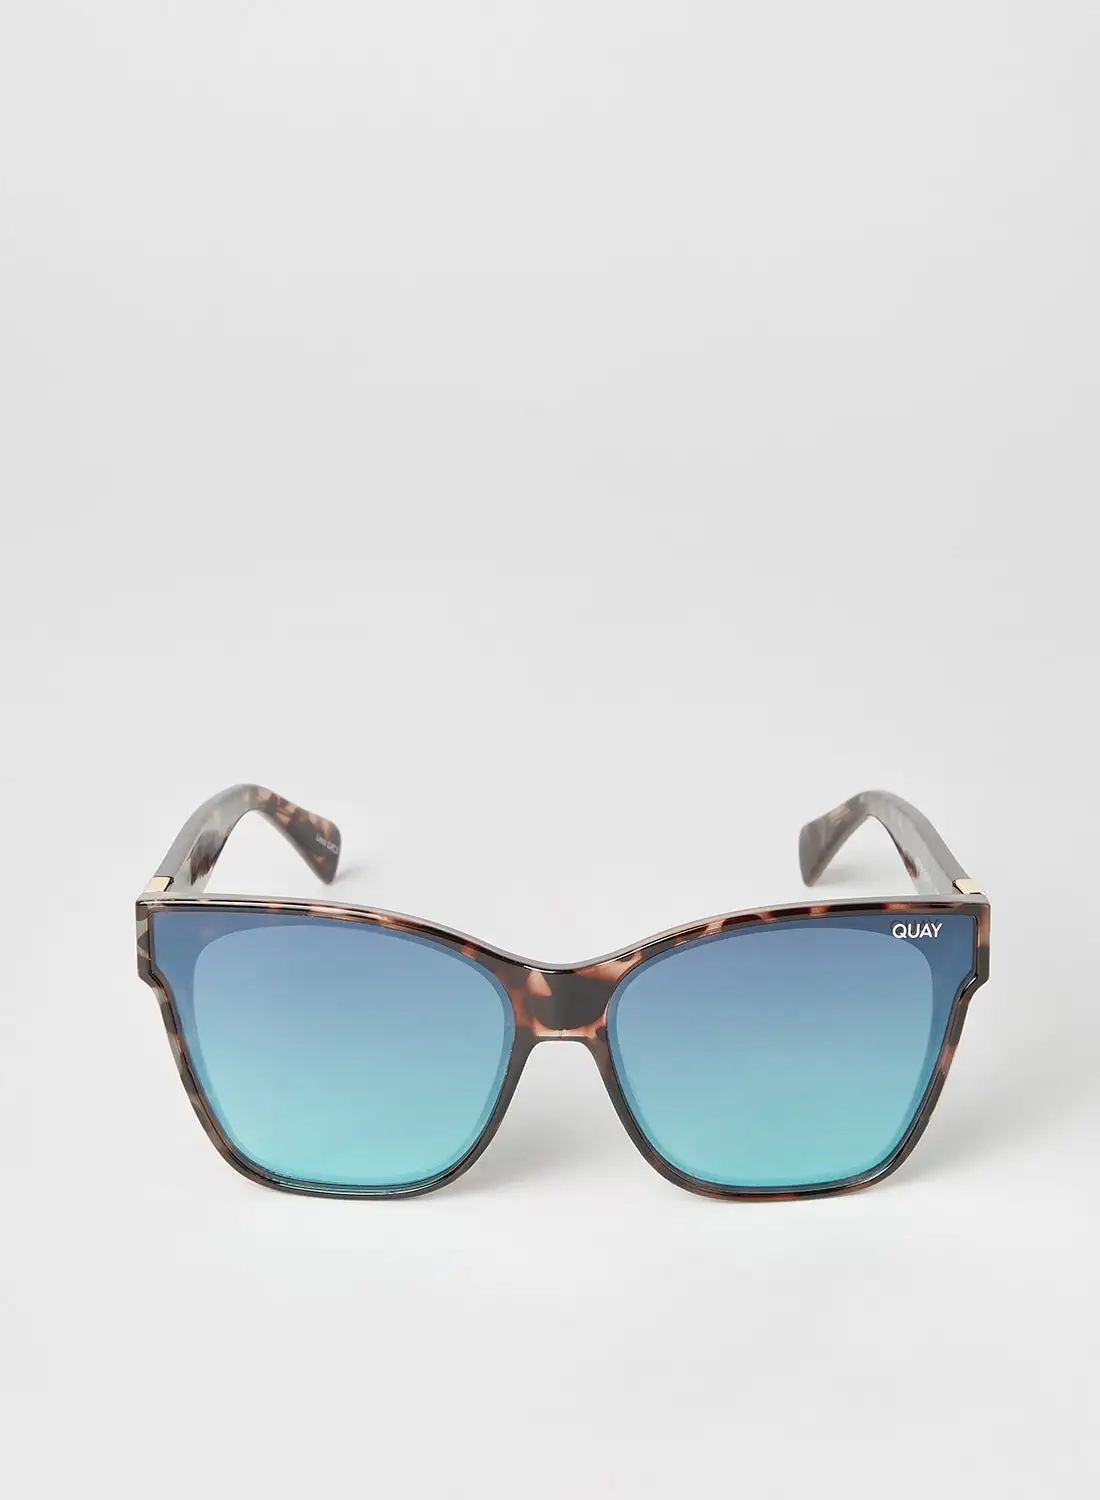 Quay Women's After Party Square Sunglasses